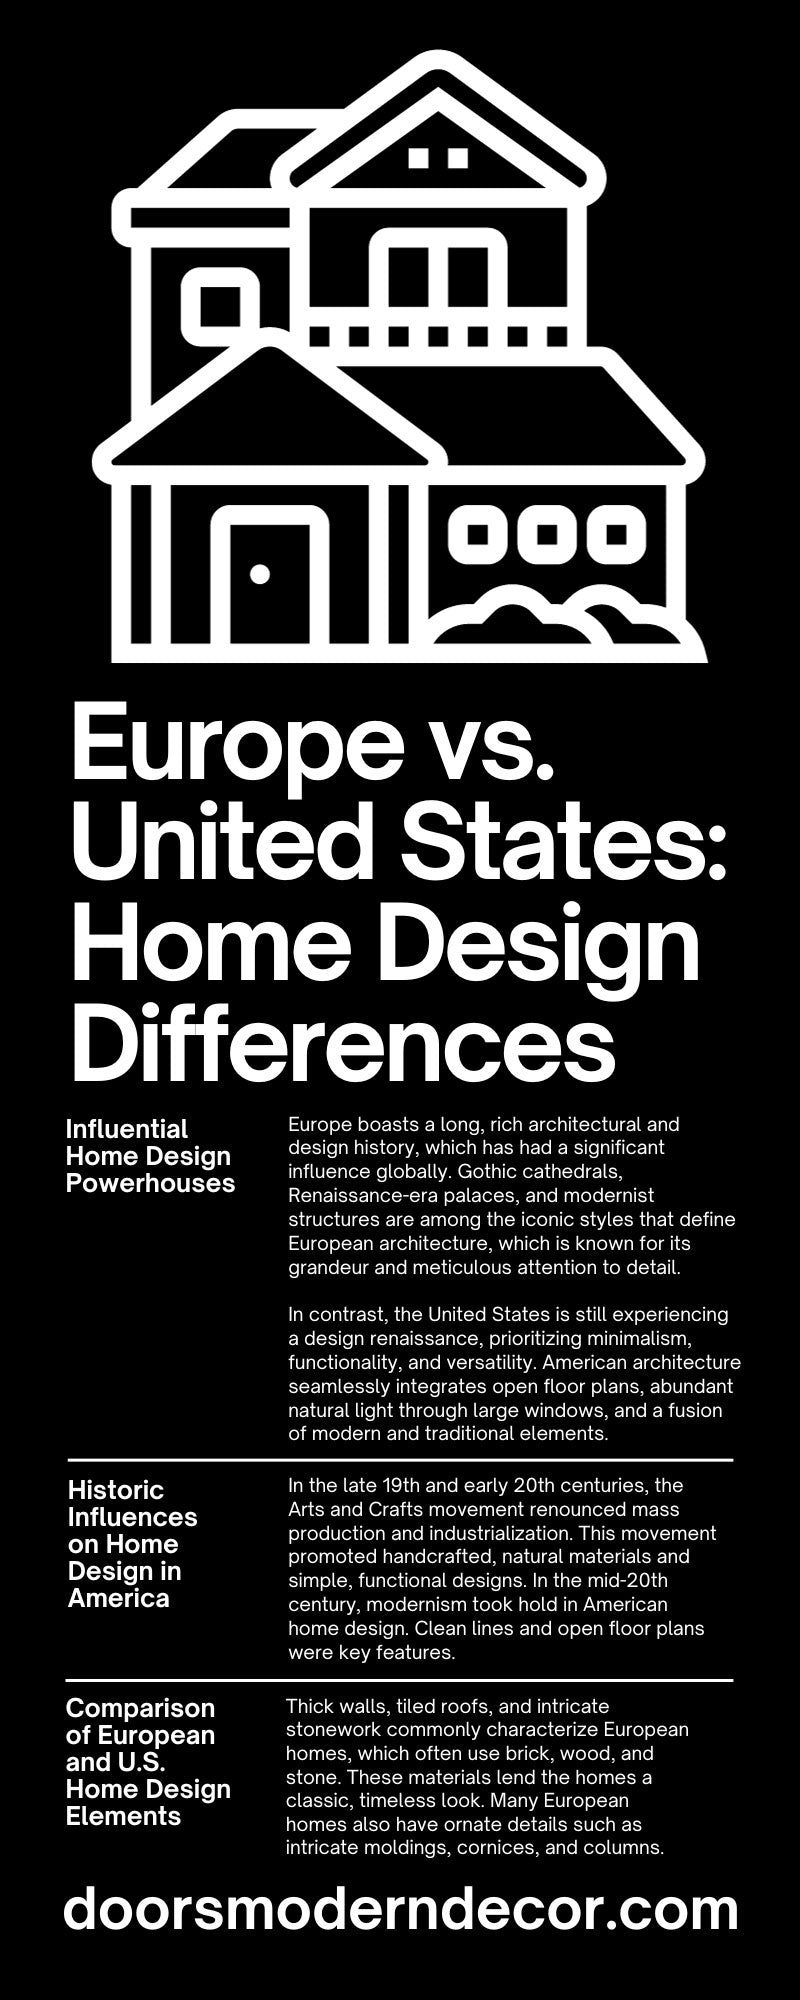 Europe vs. United States: Home Design Differences